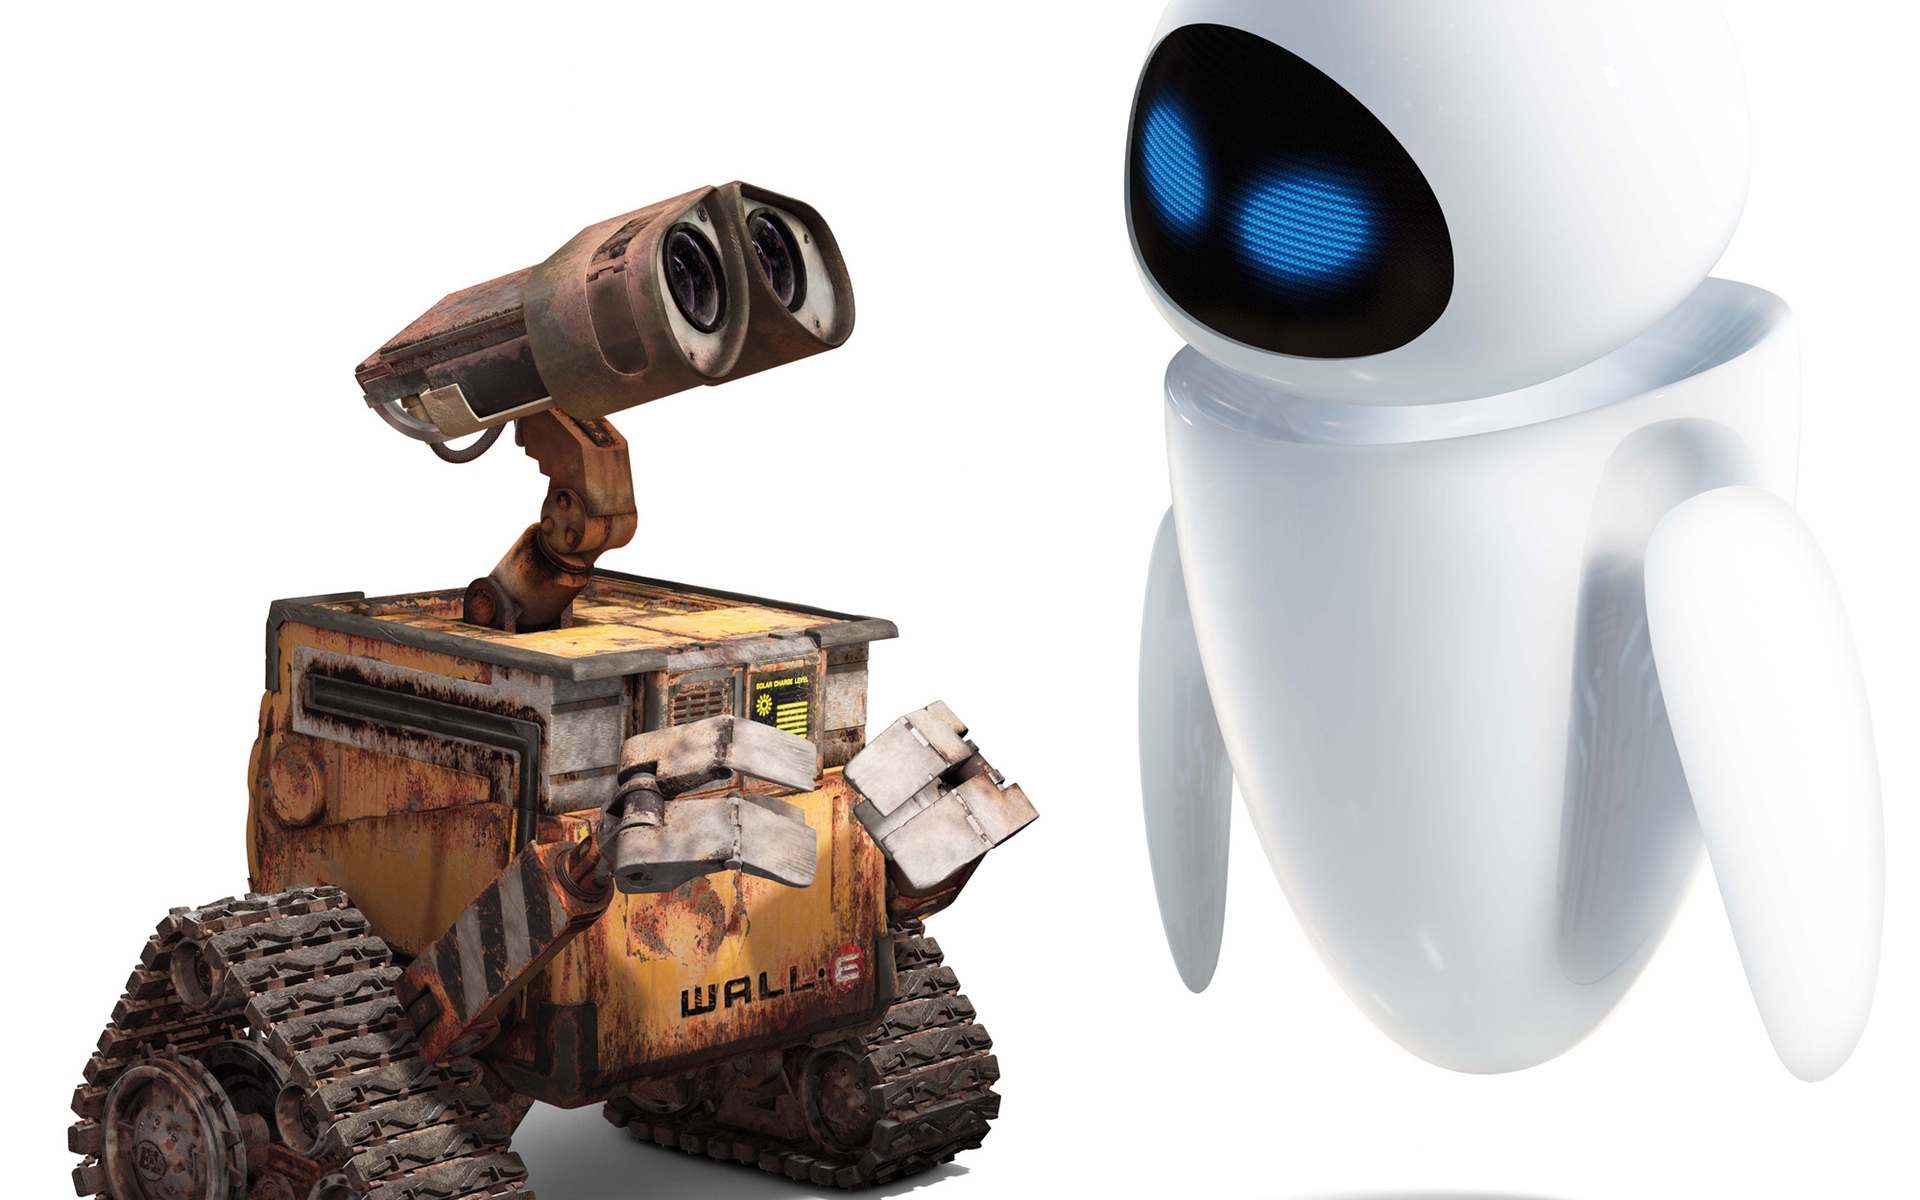 Walle Robots for 1920 x 1200 widescreen resolution